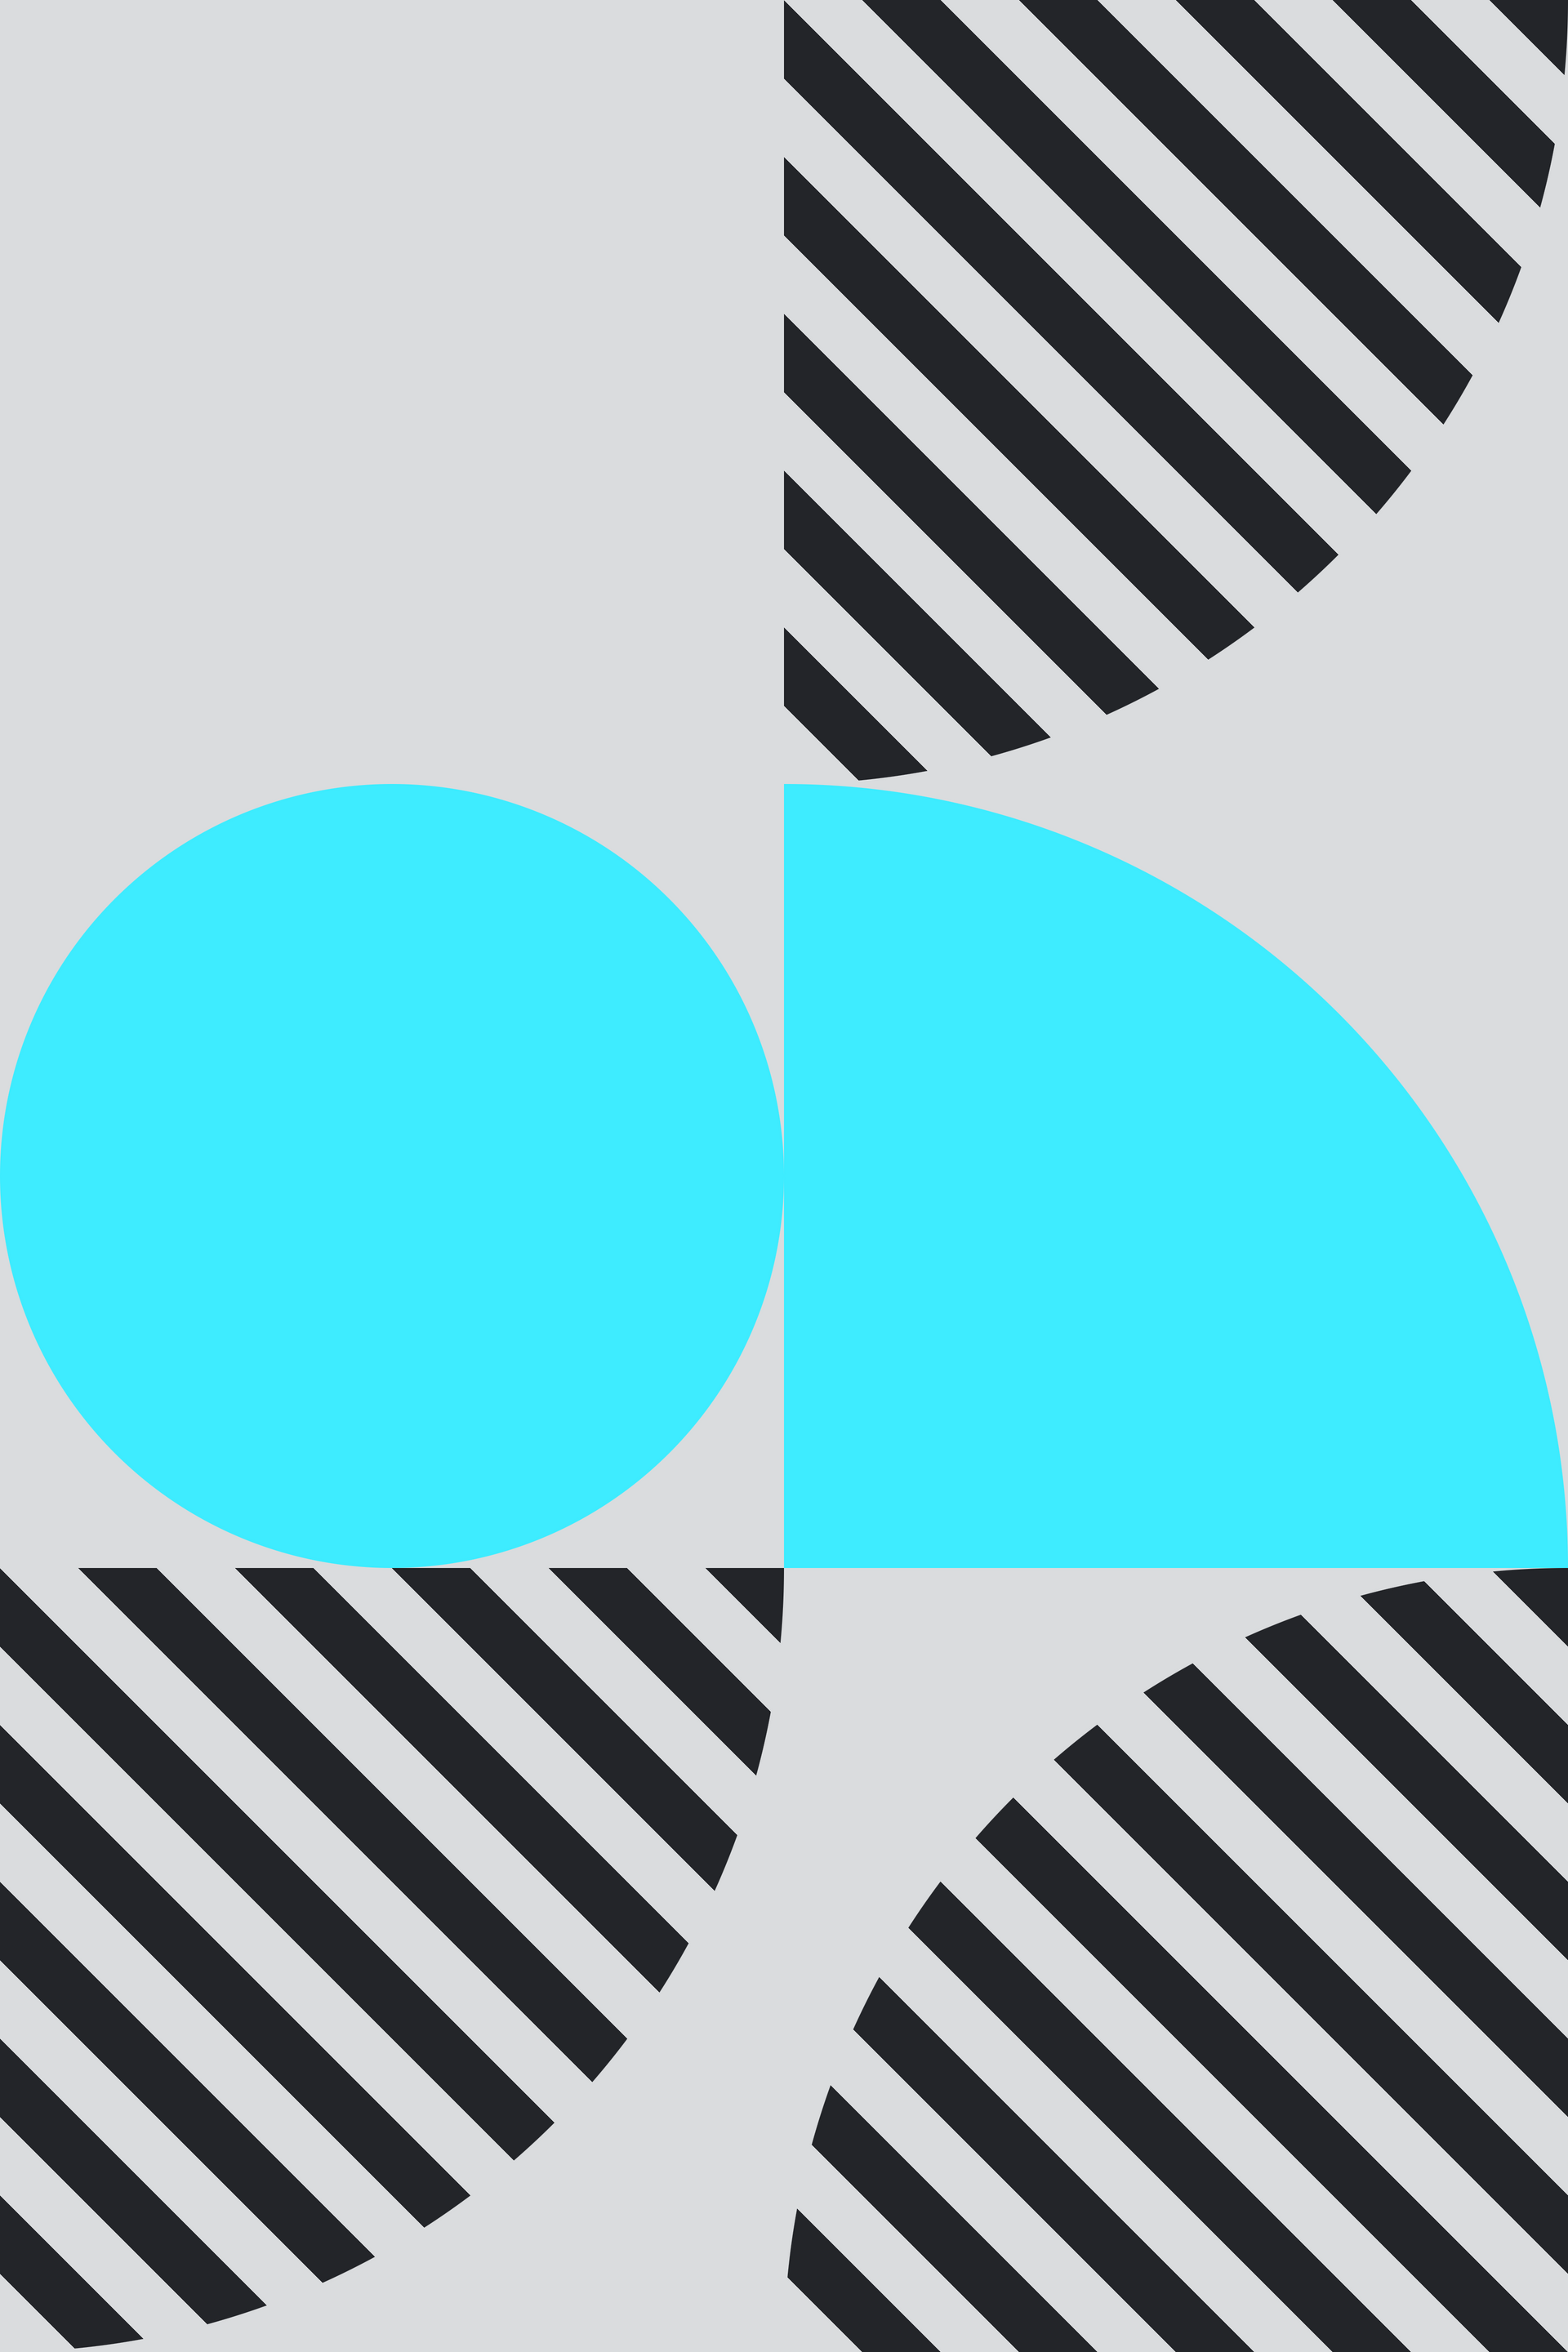 a black and white striped background with a blue circle in the middle .